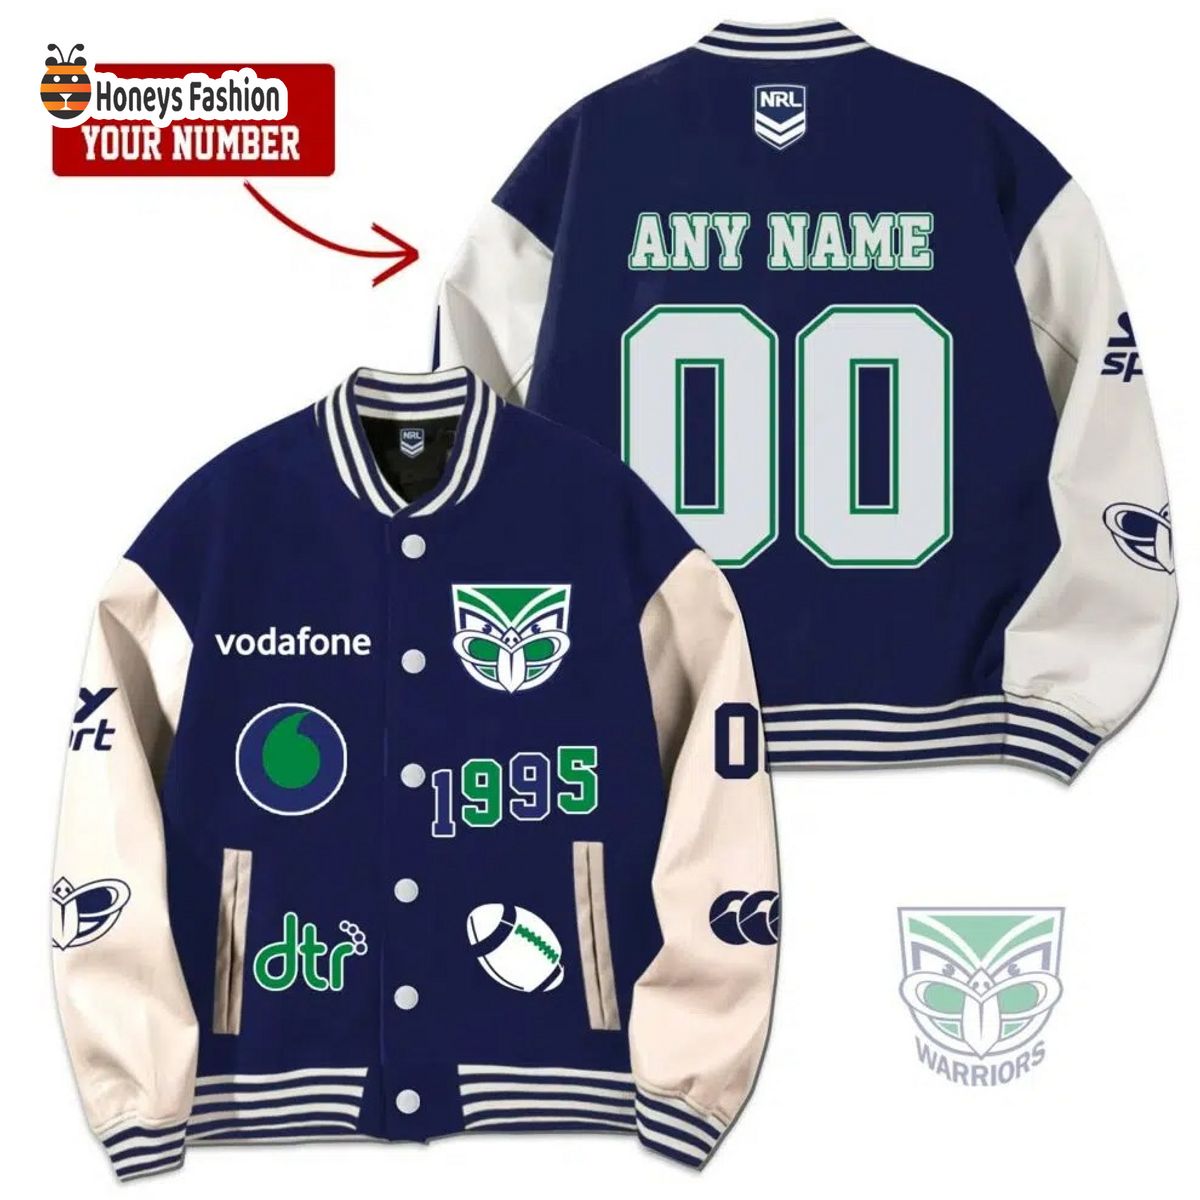 New Zealand Warriors Rugby Personalized Jacket